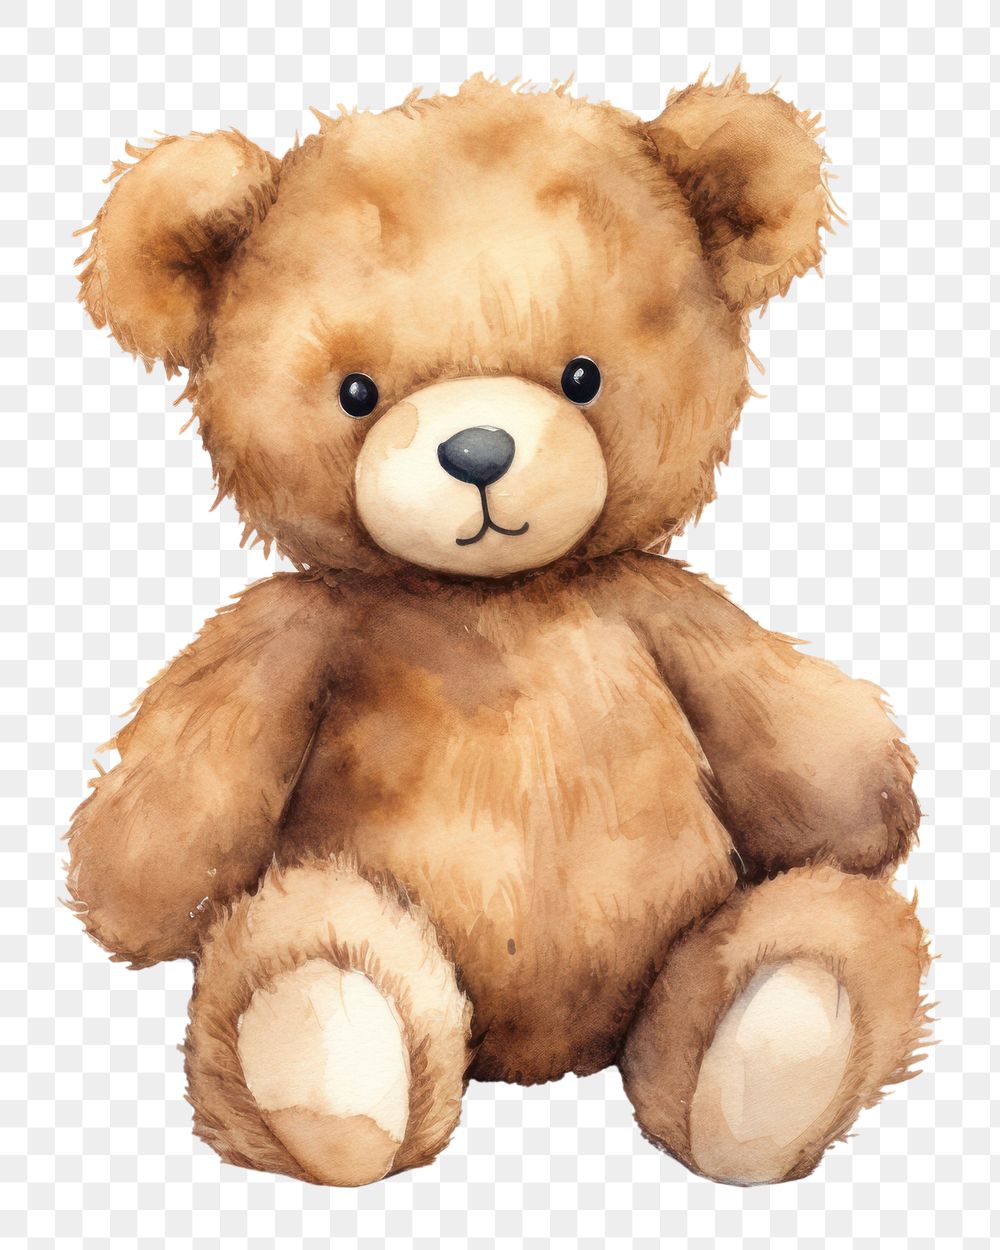 Teddy Bear Images  Free Photos, PNG Stickers, Wallpapers & Backgrounds -  rawpixel